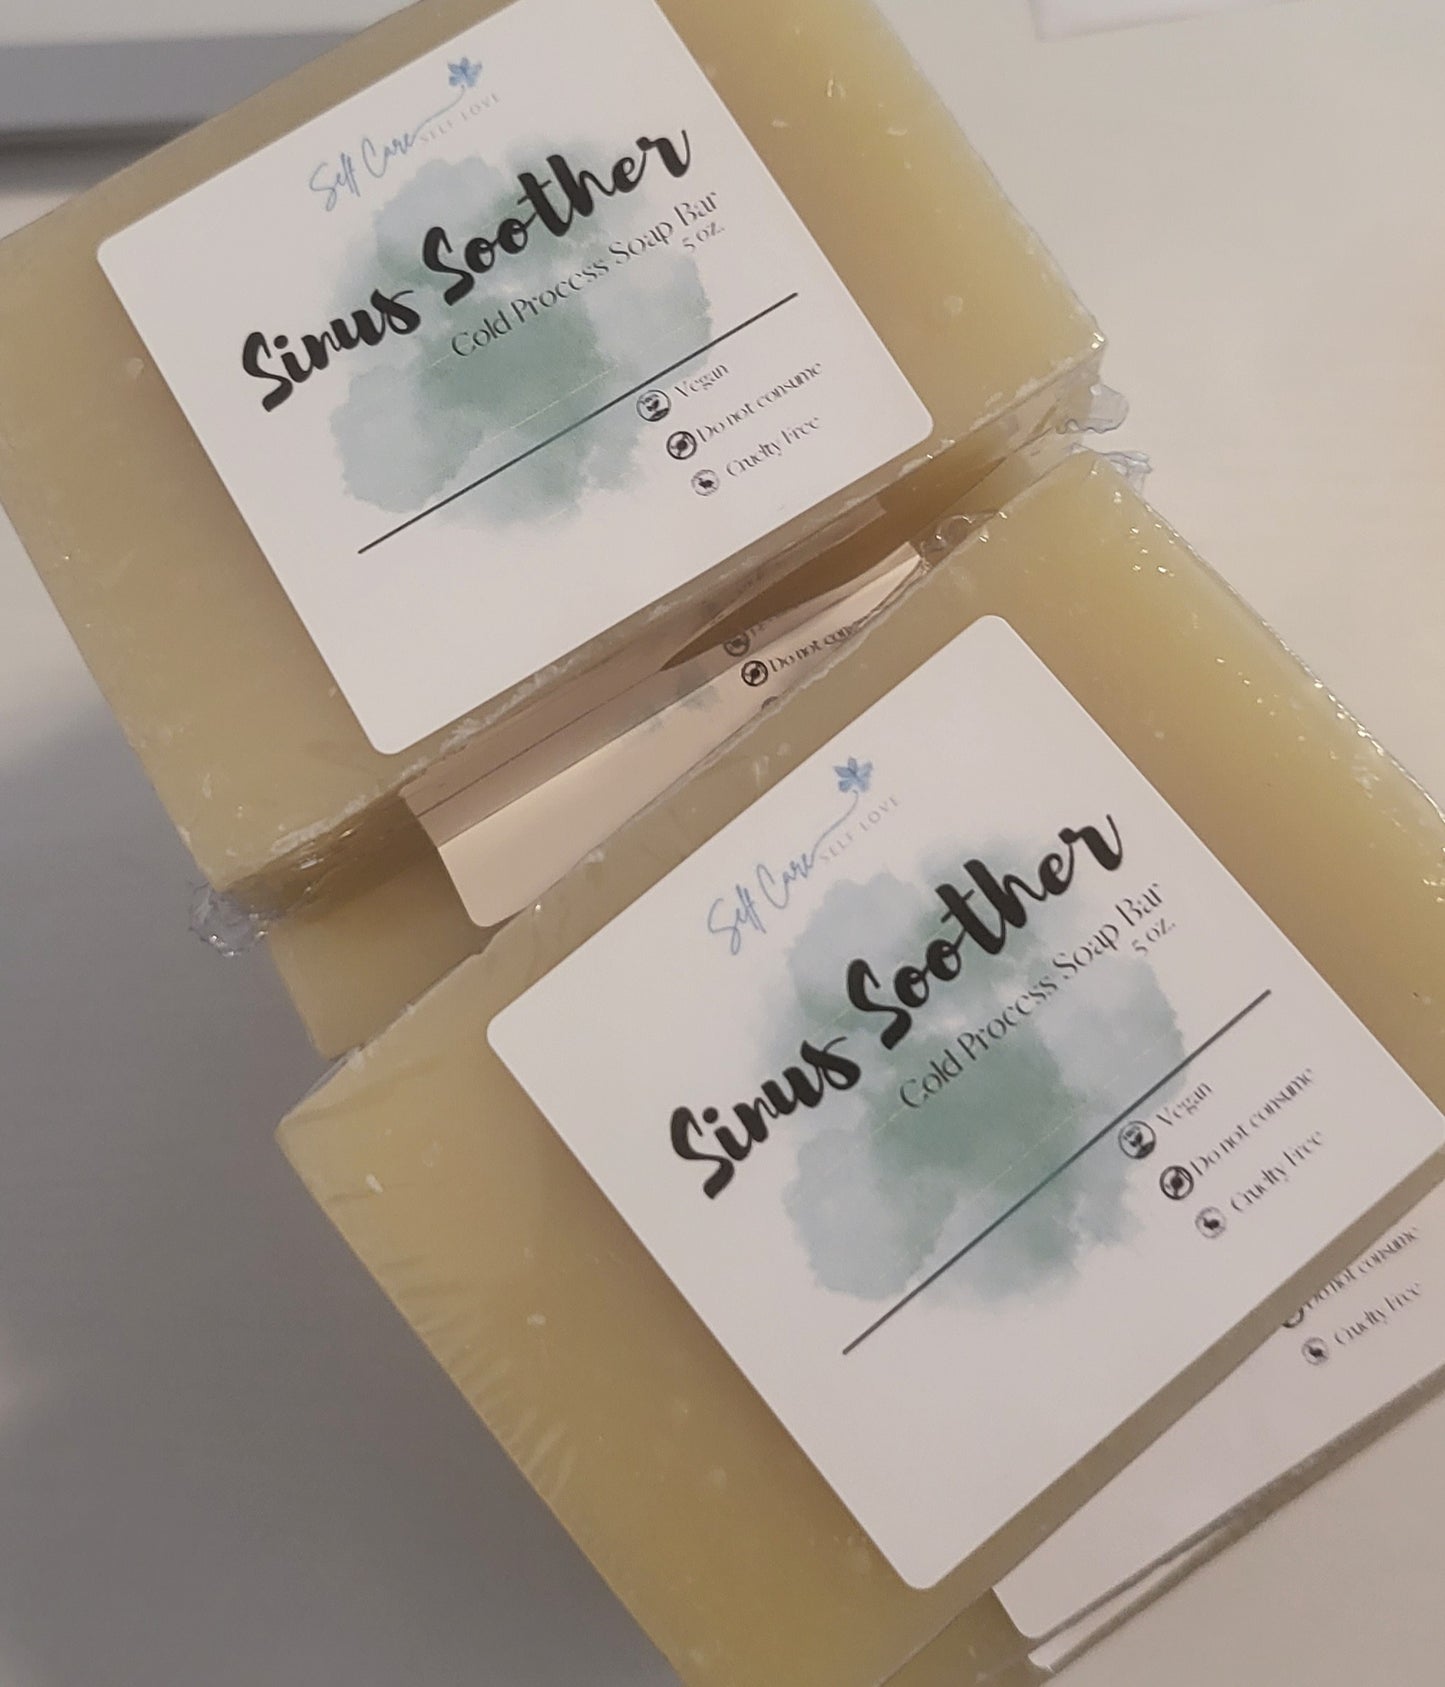 Sinus Soother Soap Bar